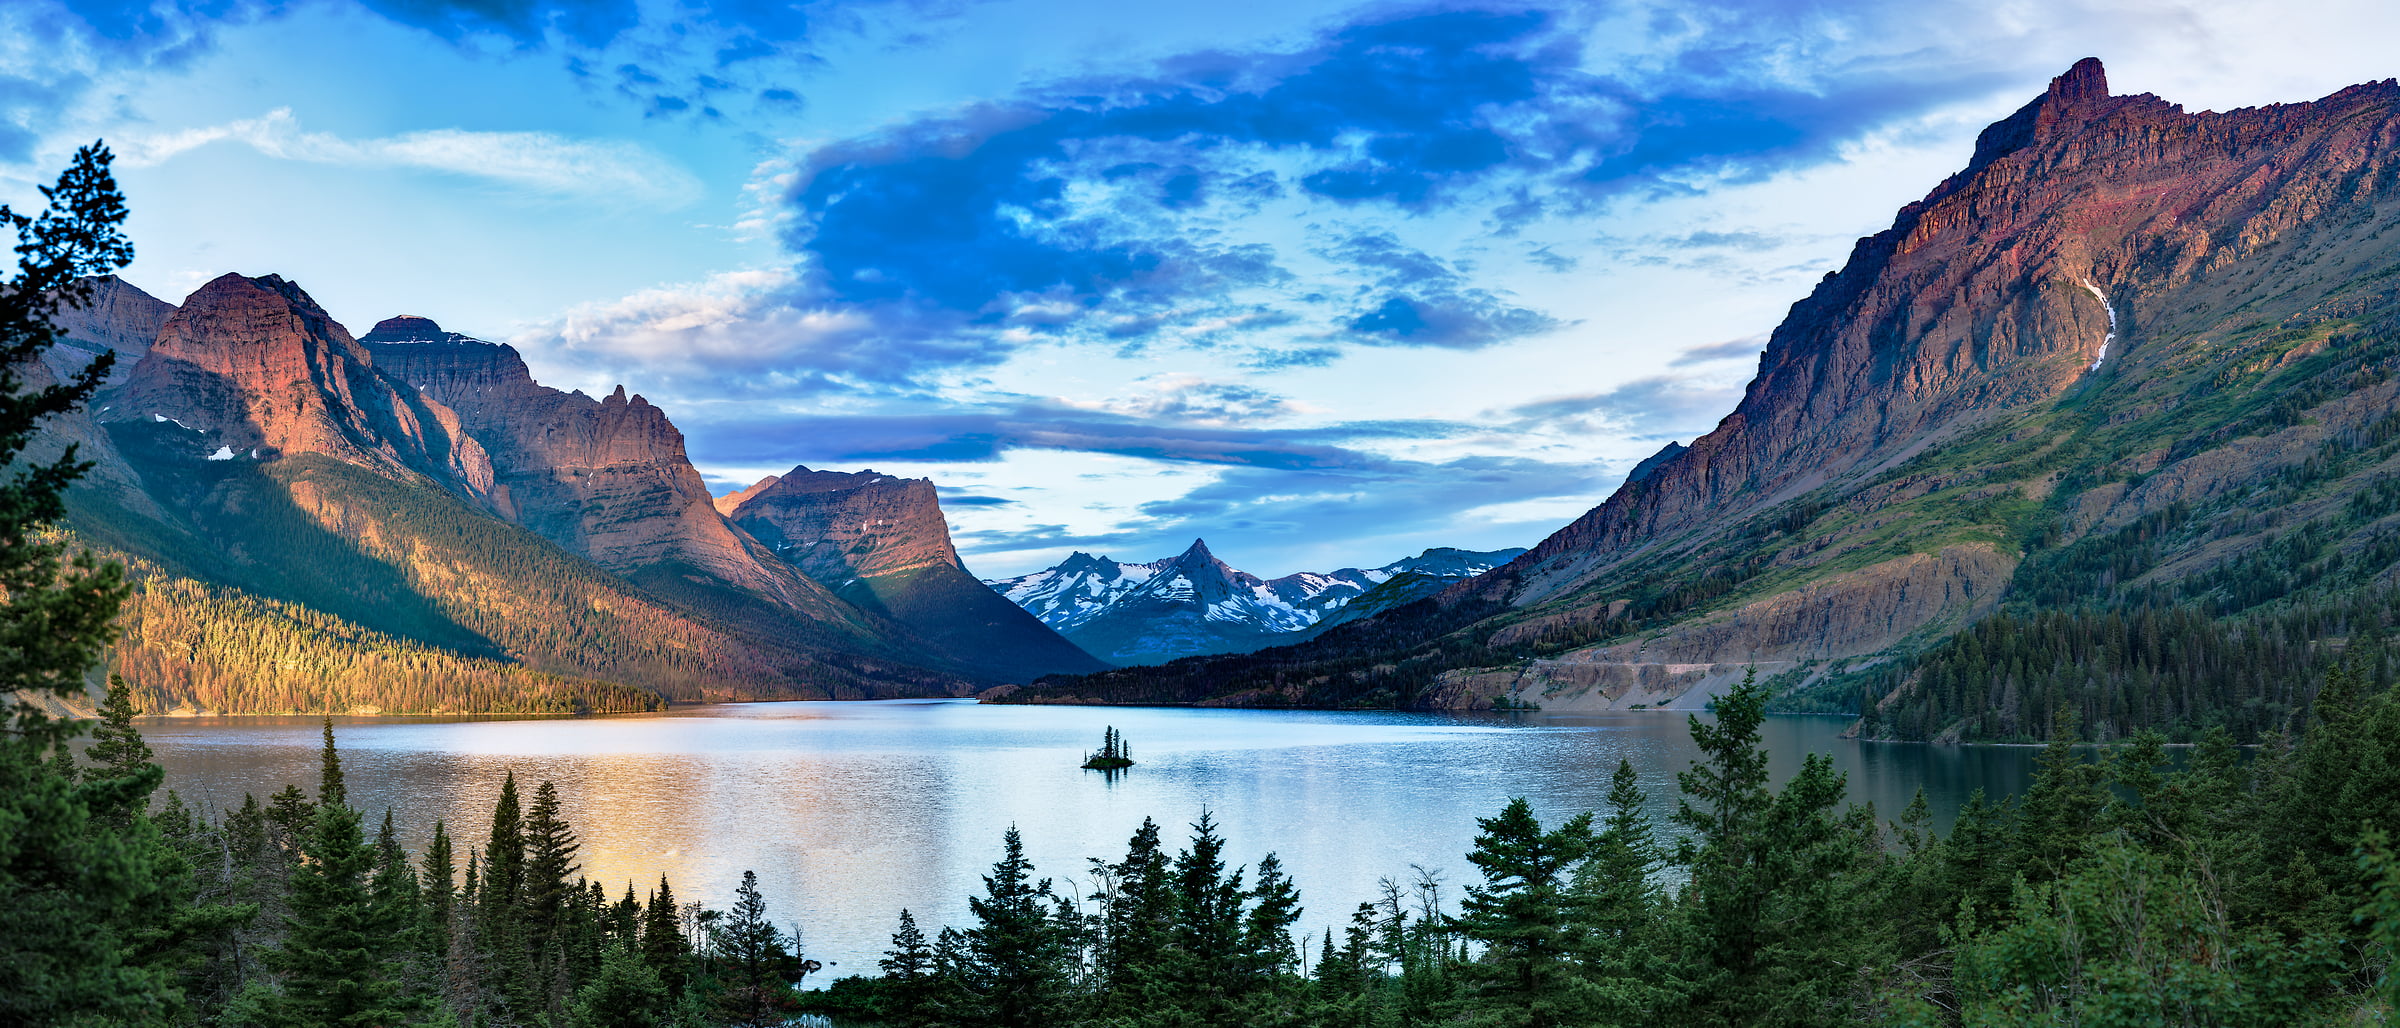 789 megapixels! A very high resolution, large-format VAST photo print of St. Mary Lake in Glacier National Park; landscape photograph created by John Freeman